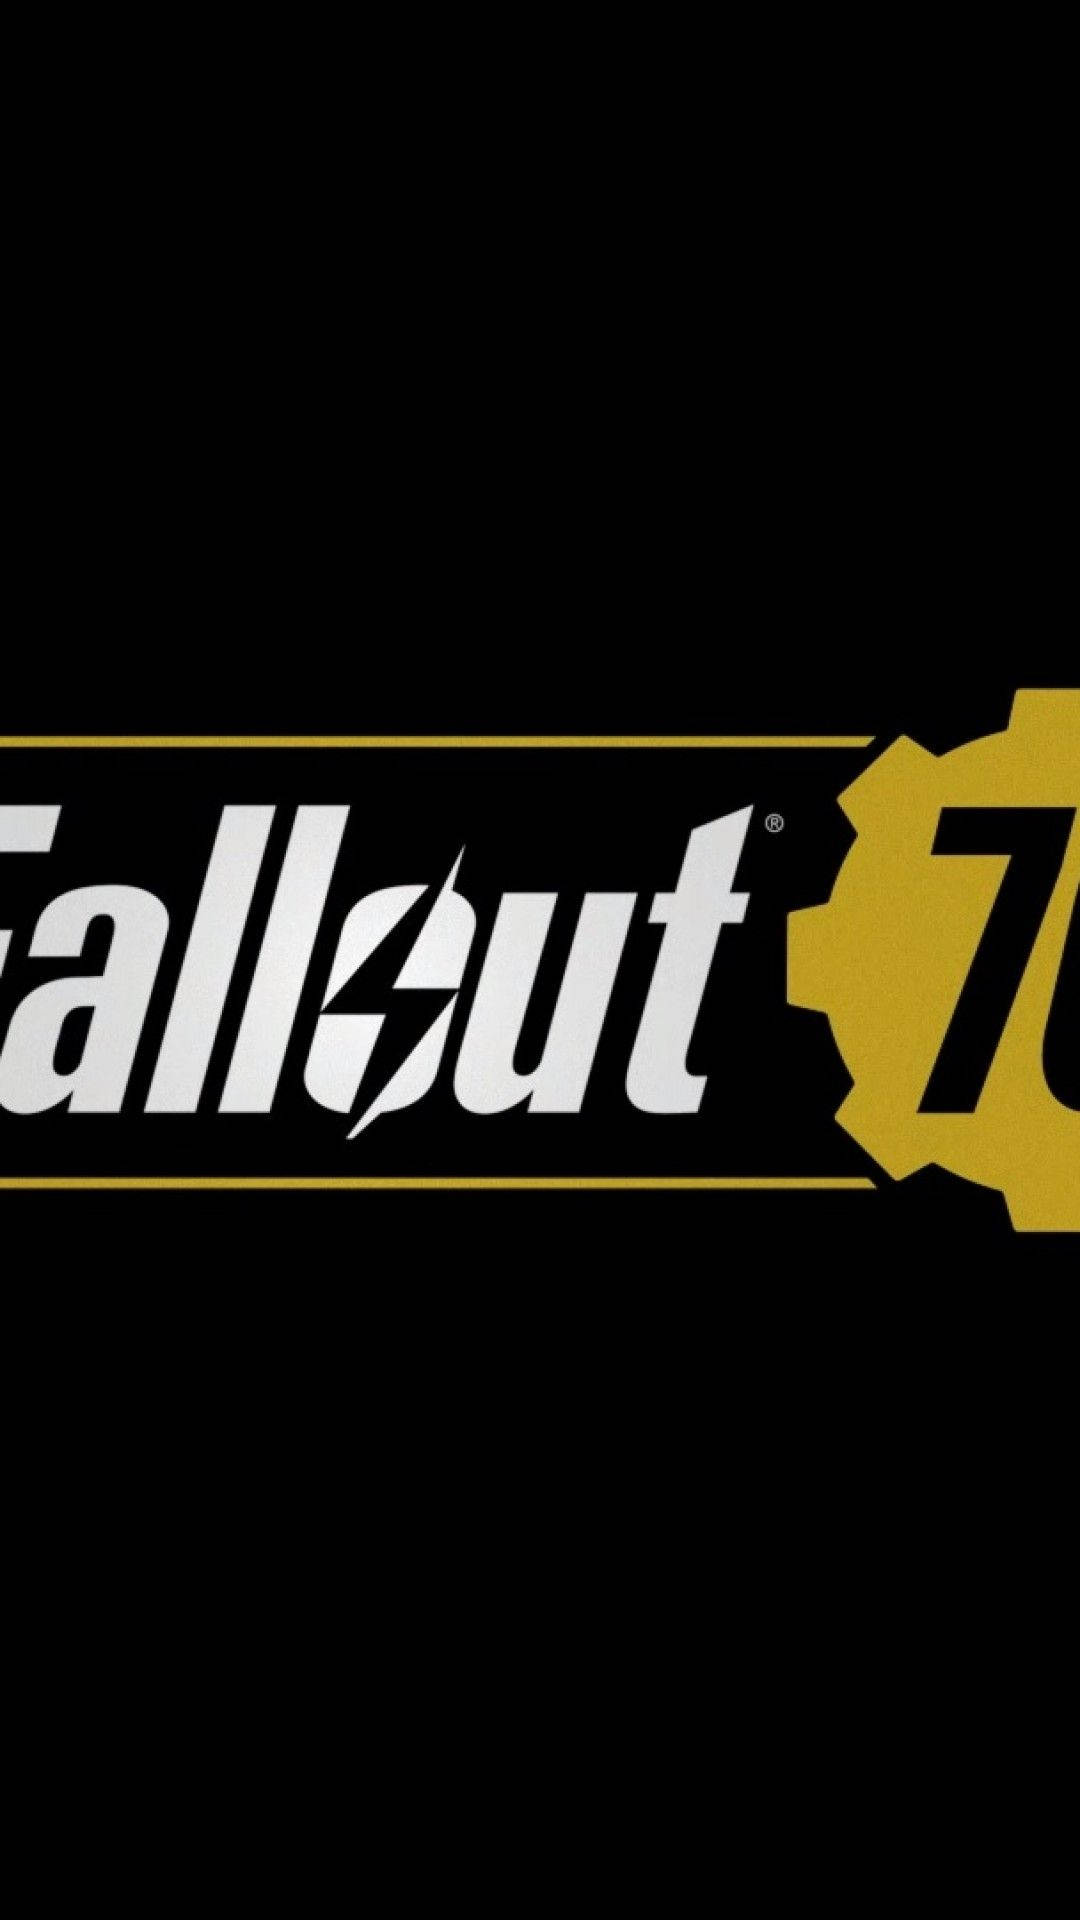 Fallout 76 Logo In Black Background